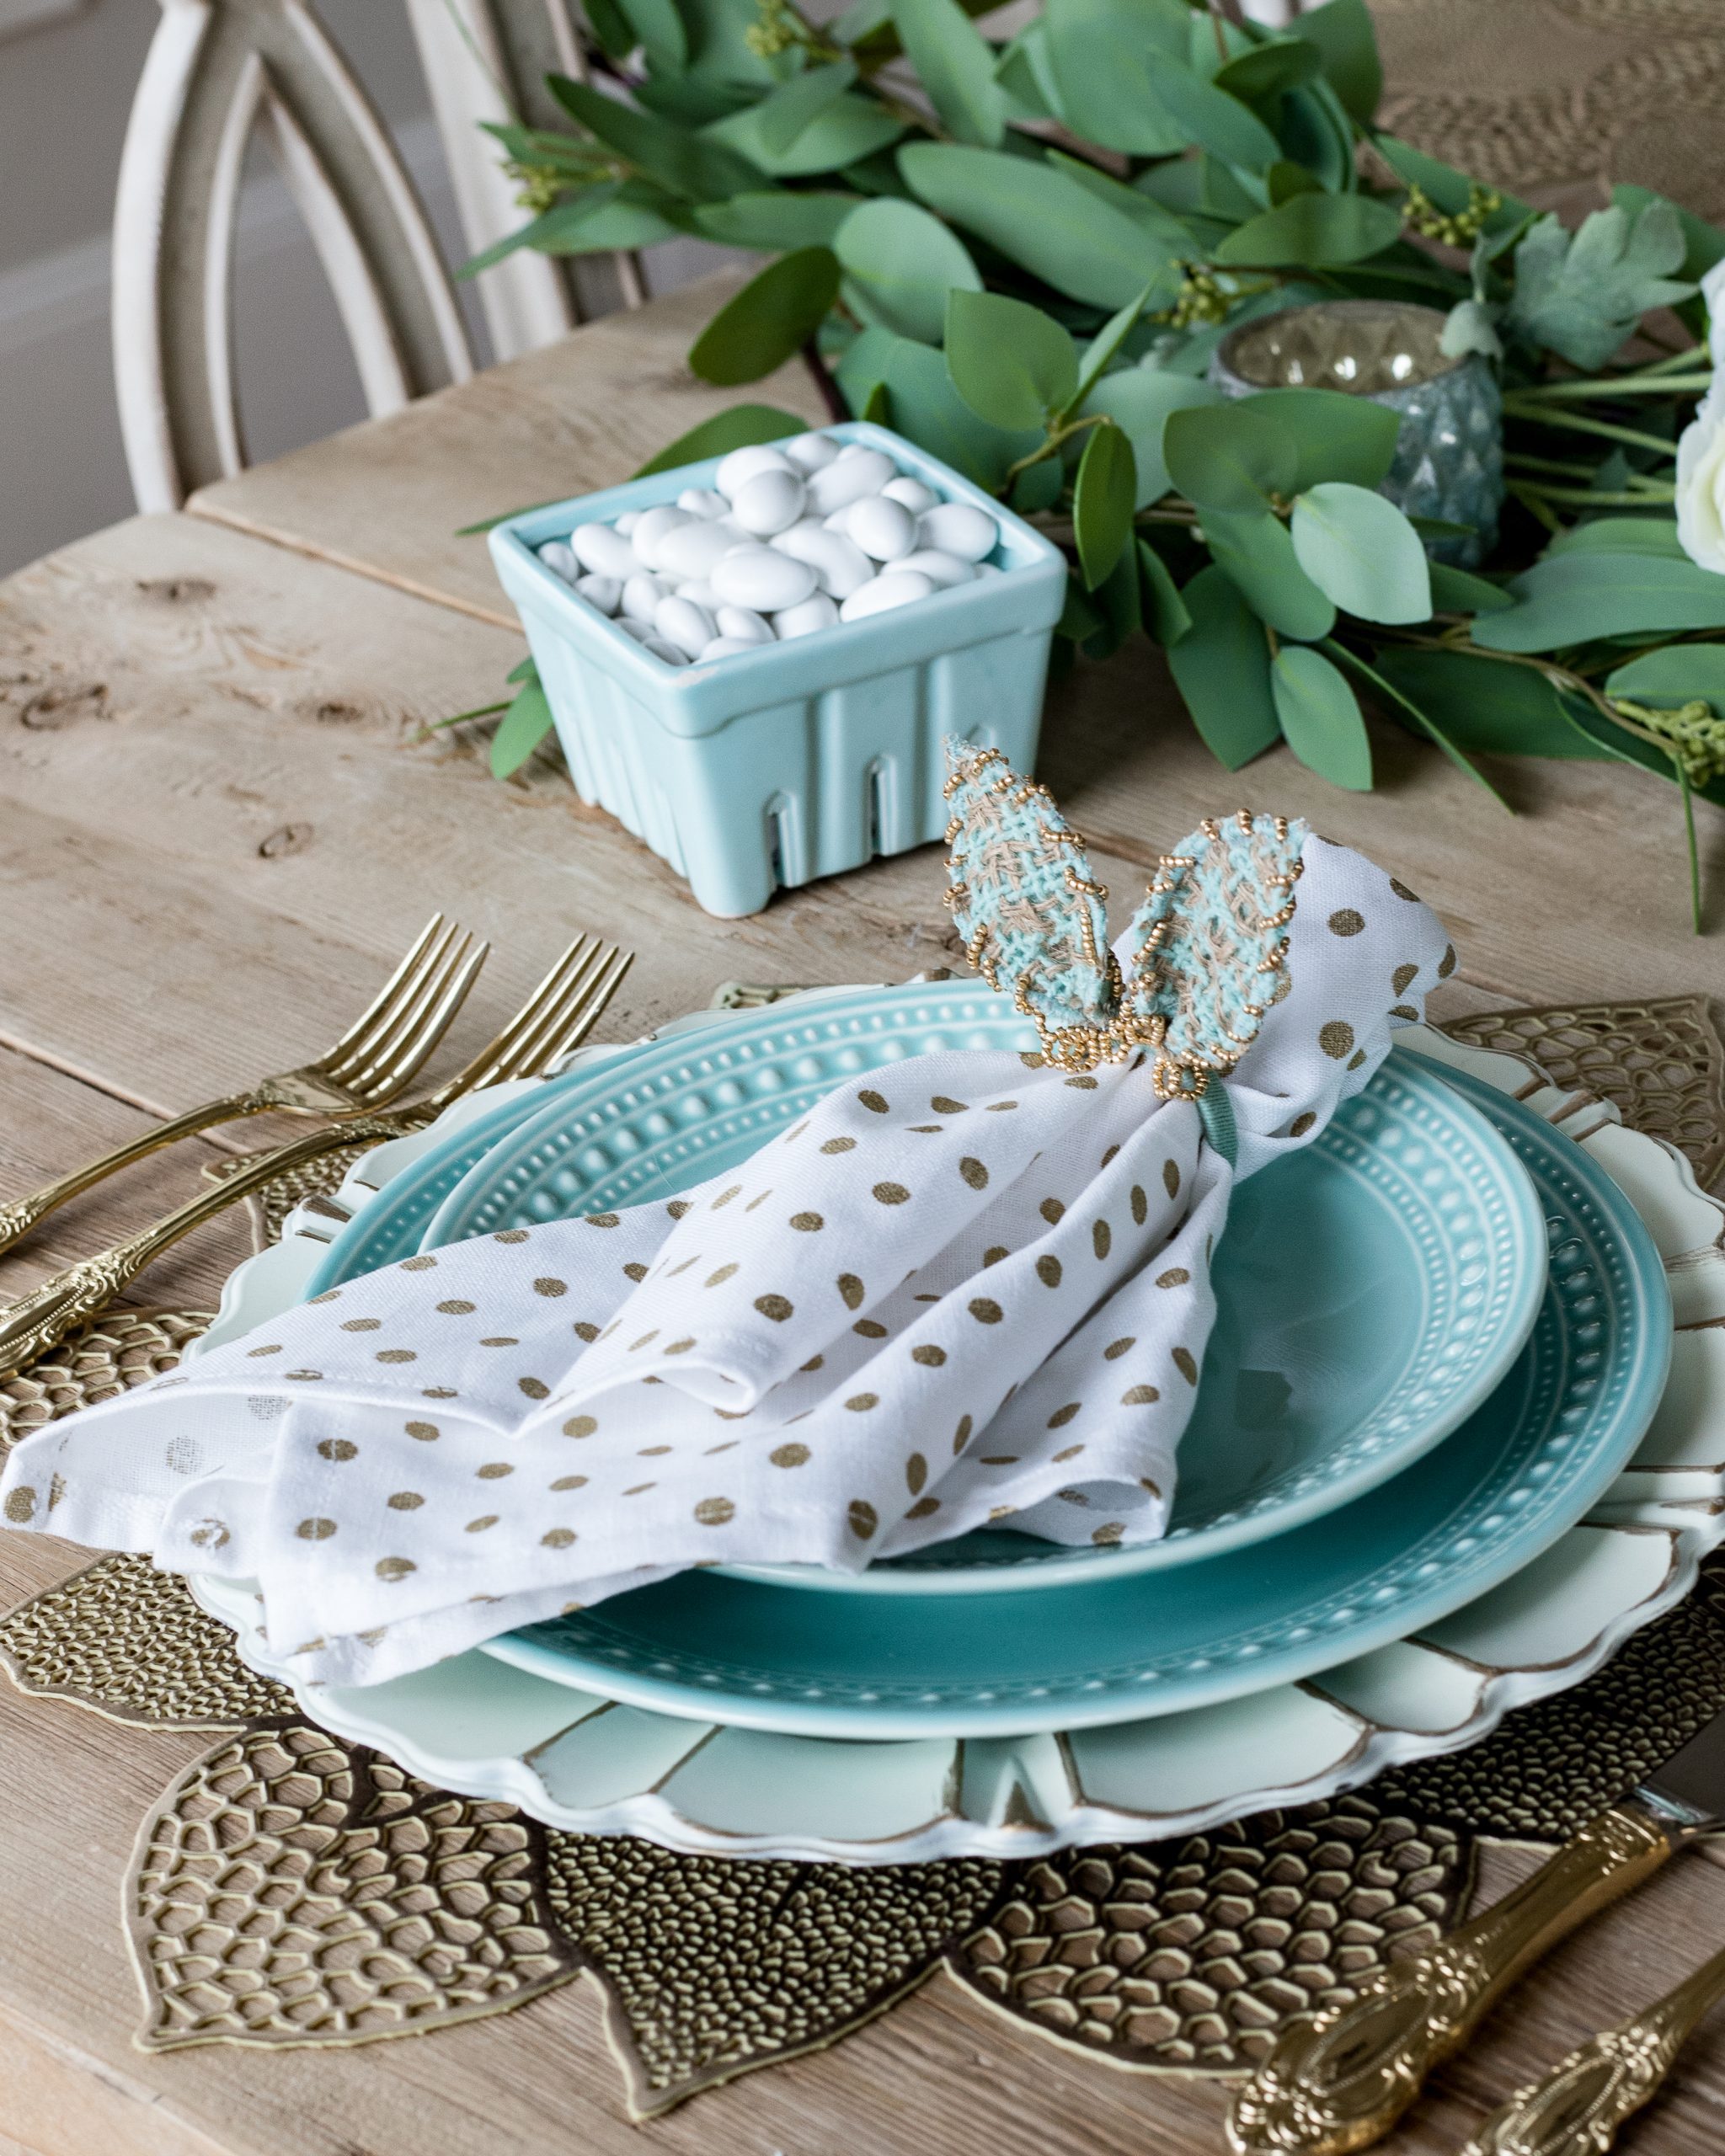 https://homewithhollyj.com/wp-content/uploads/2022/04/Easter-Table-Place-settings-and-Napking-Ring-Ideas-8-2-scaled.jpg